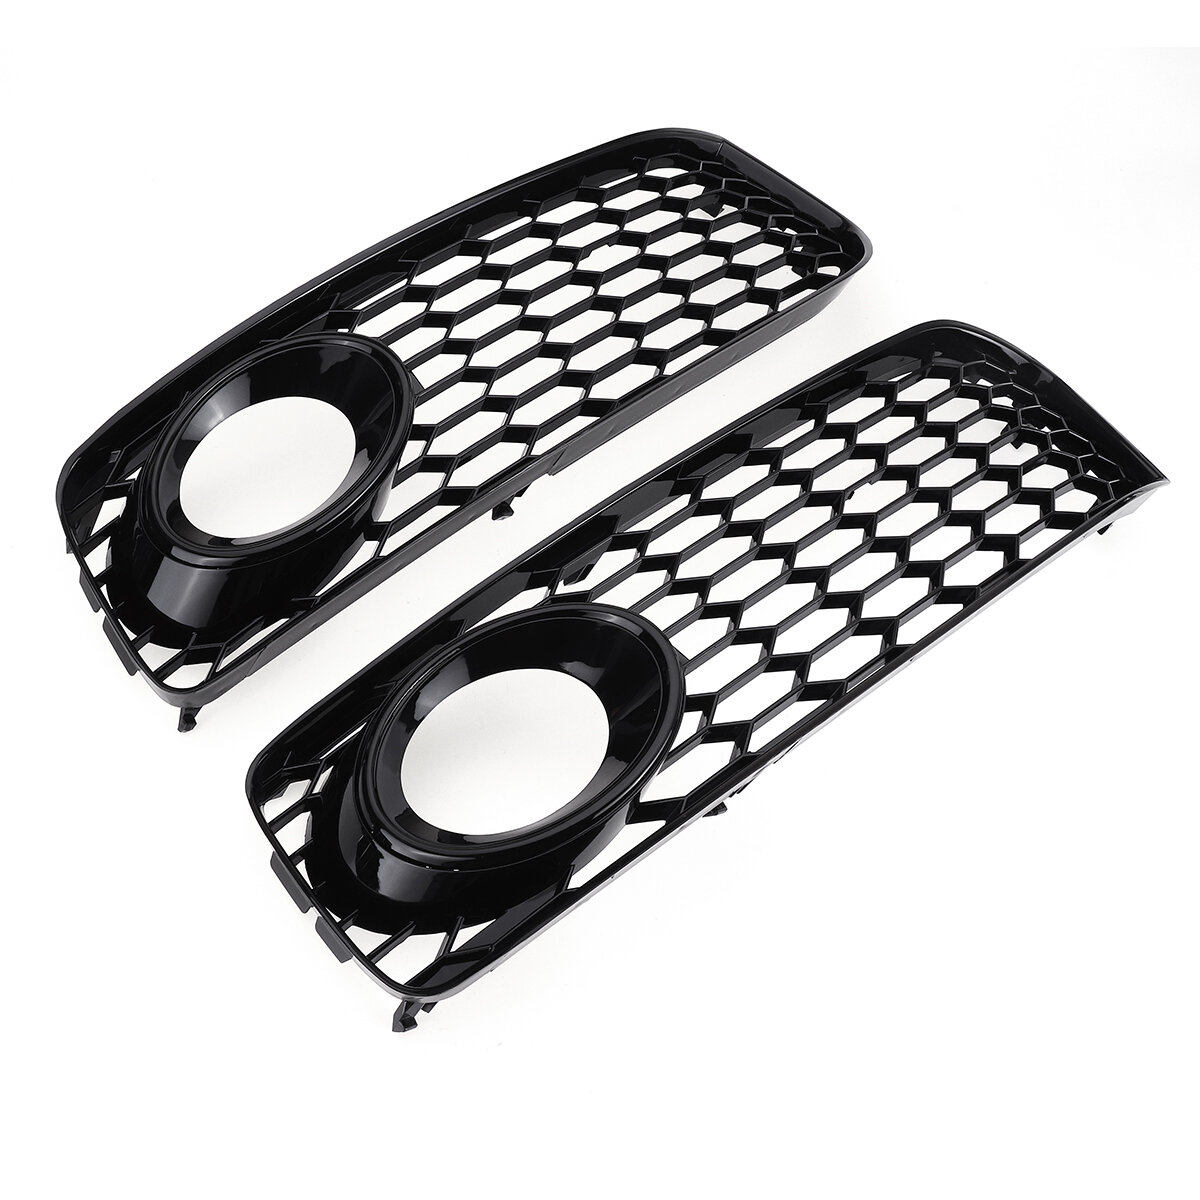 Image of Front Fog Light Lamp Cover Grille Grill Honeycomb Hex Black For Audi A5 S-Line S5 B8 RS5 2008-2012